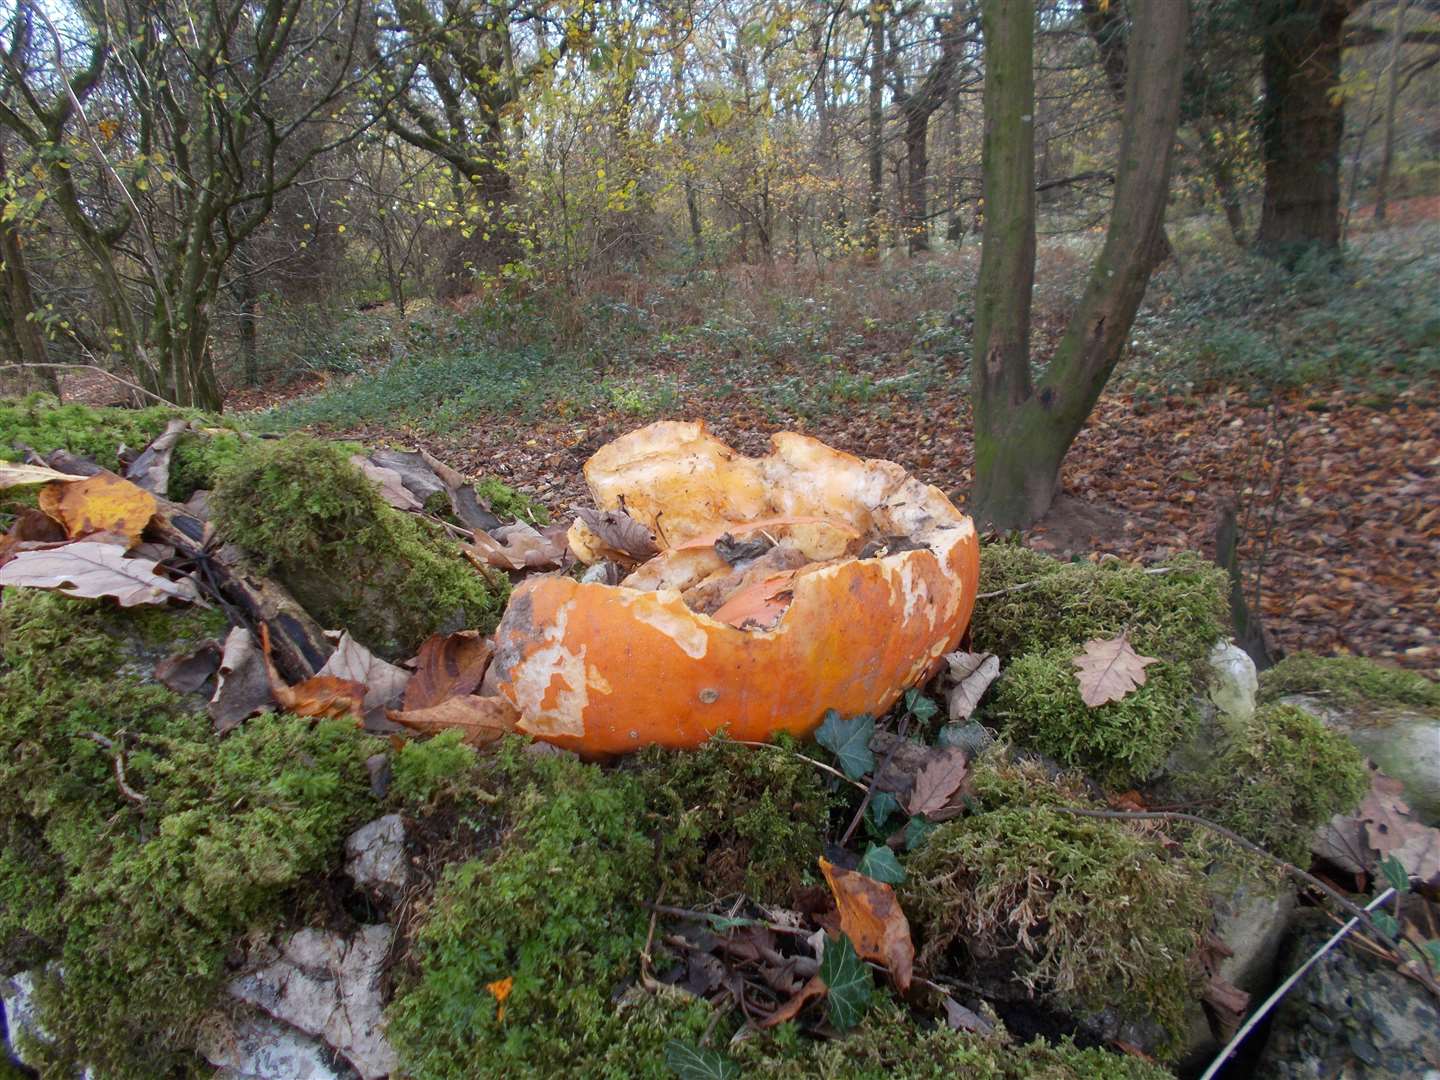 People should not be tempted to dump their pumpkins, thinking they're feeding wildlife